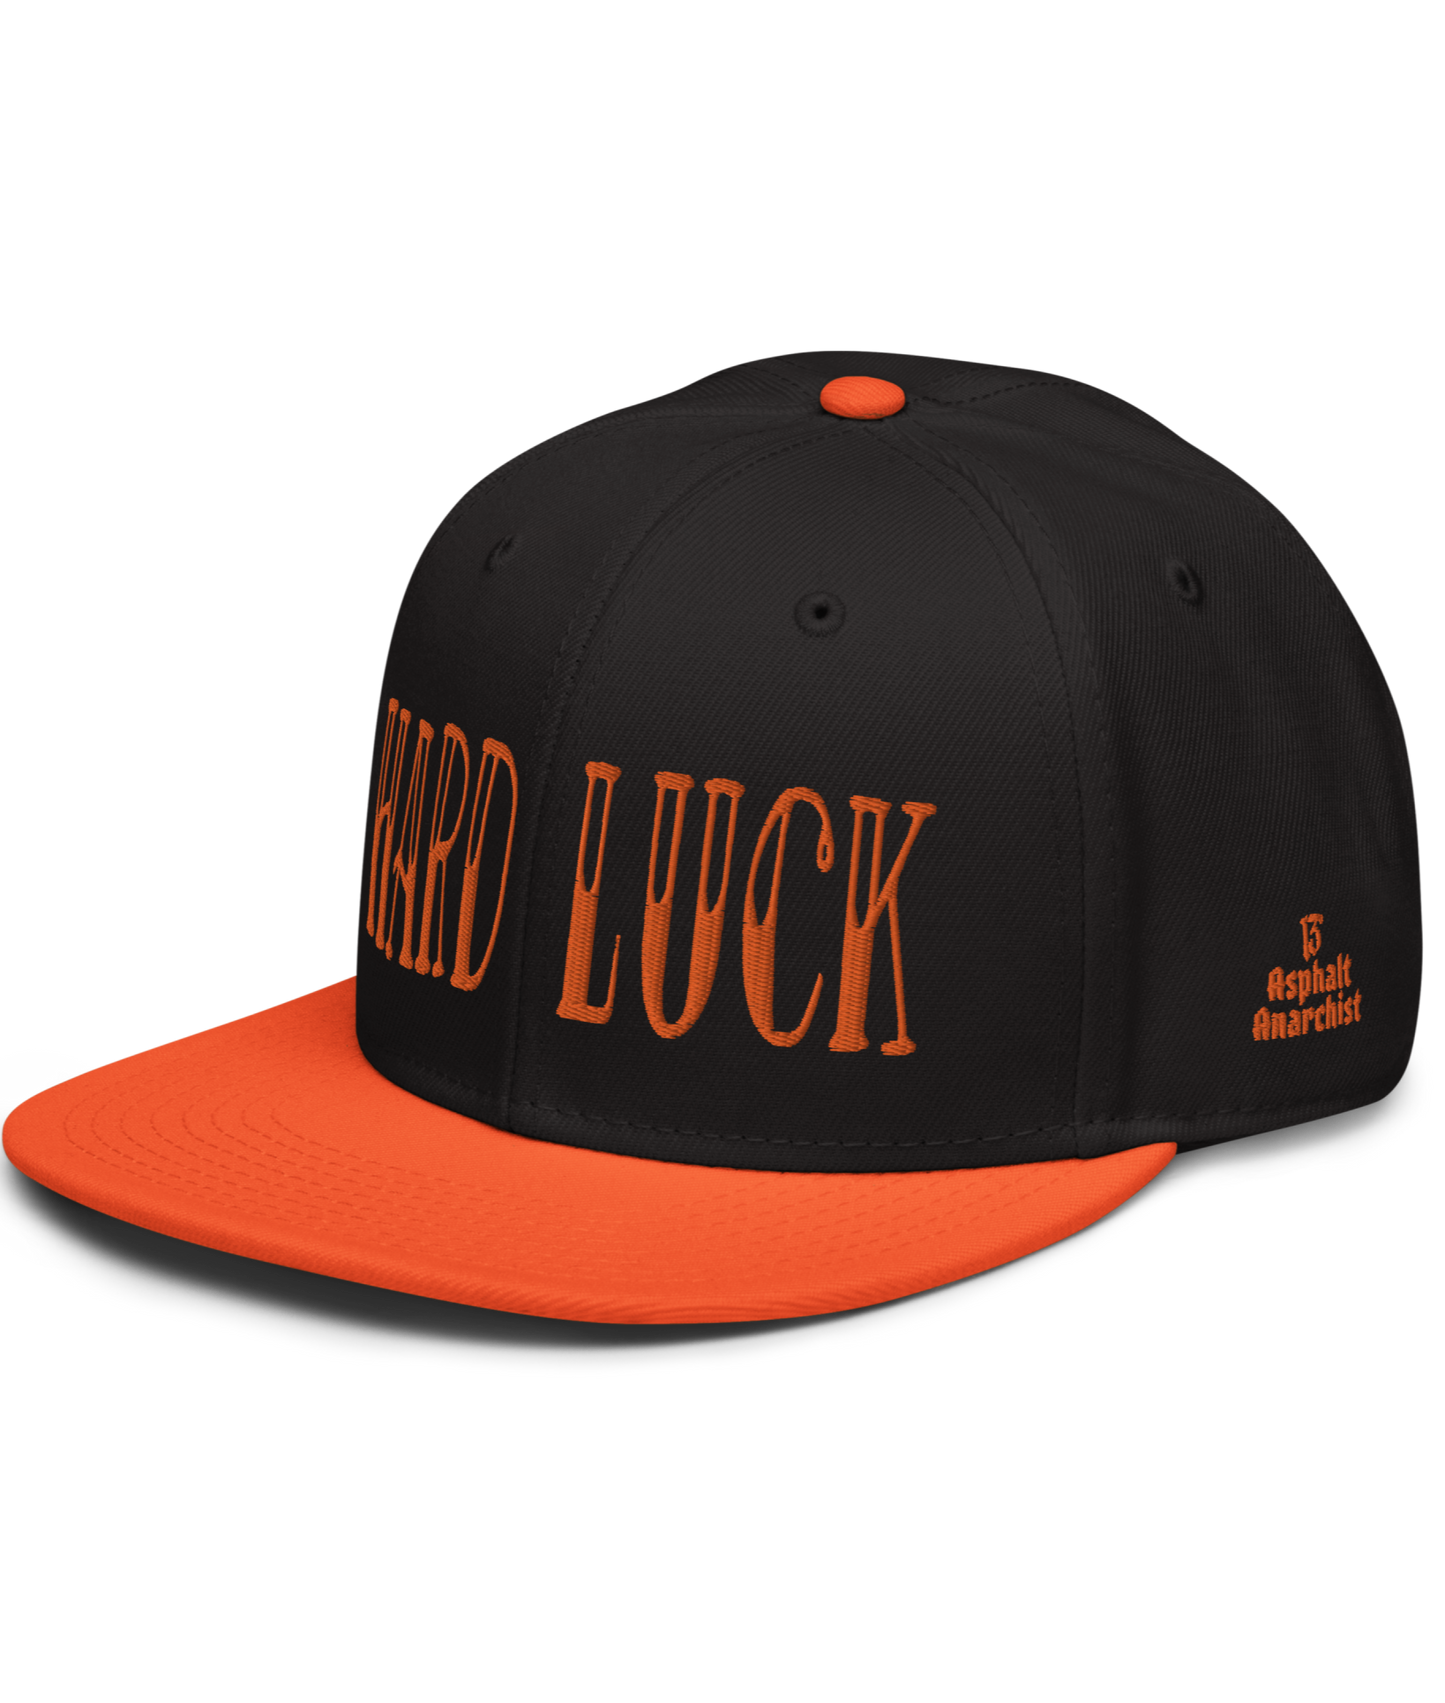 The Hard Luck Snapback Hat From Asphalt Anarchist Clothing Co. HOT ROD KUSTOM KULTURE APPAREL & PRODUCTS